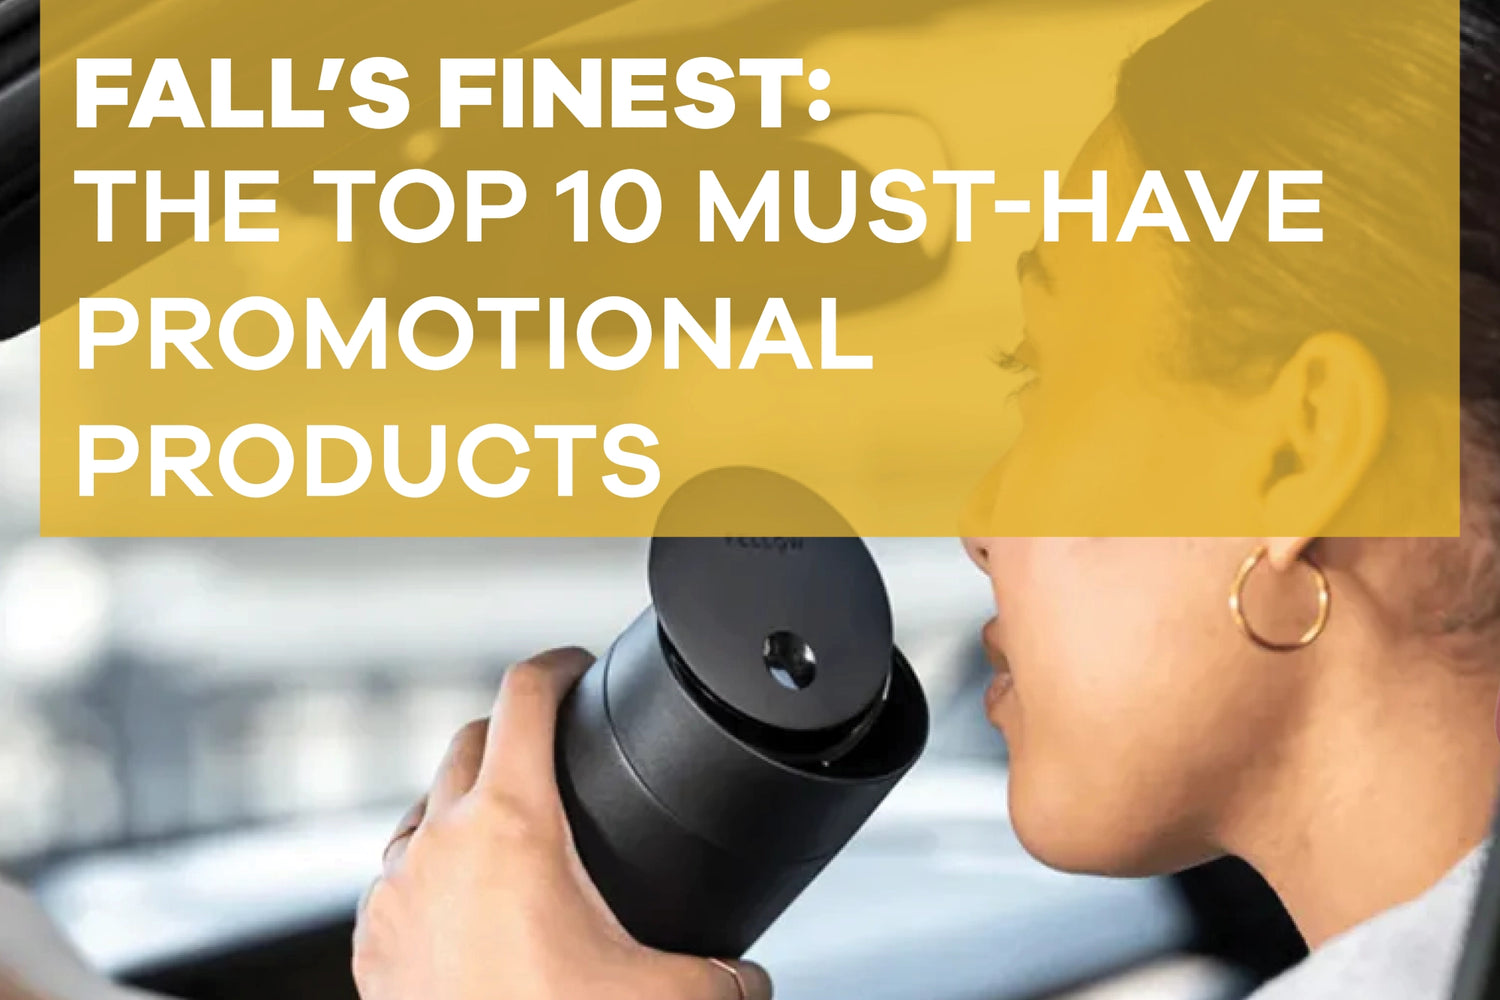 Fall’s Finest: the Top 10 Must-Have Promotional Products